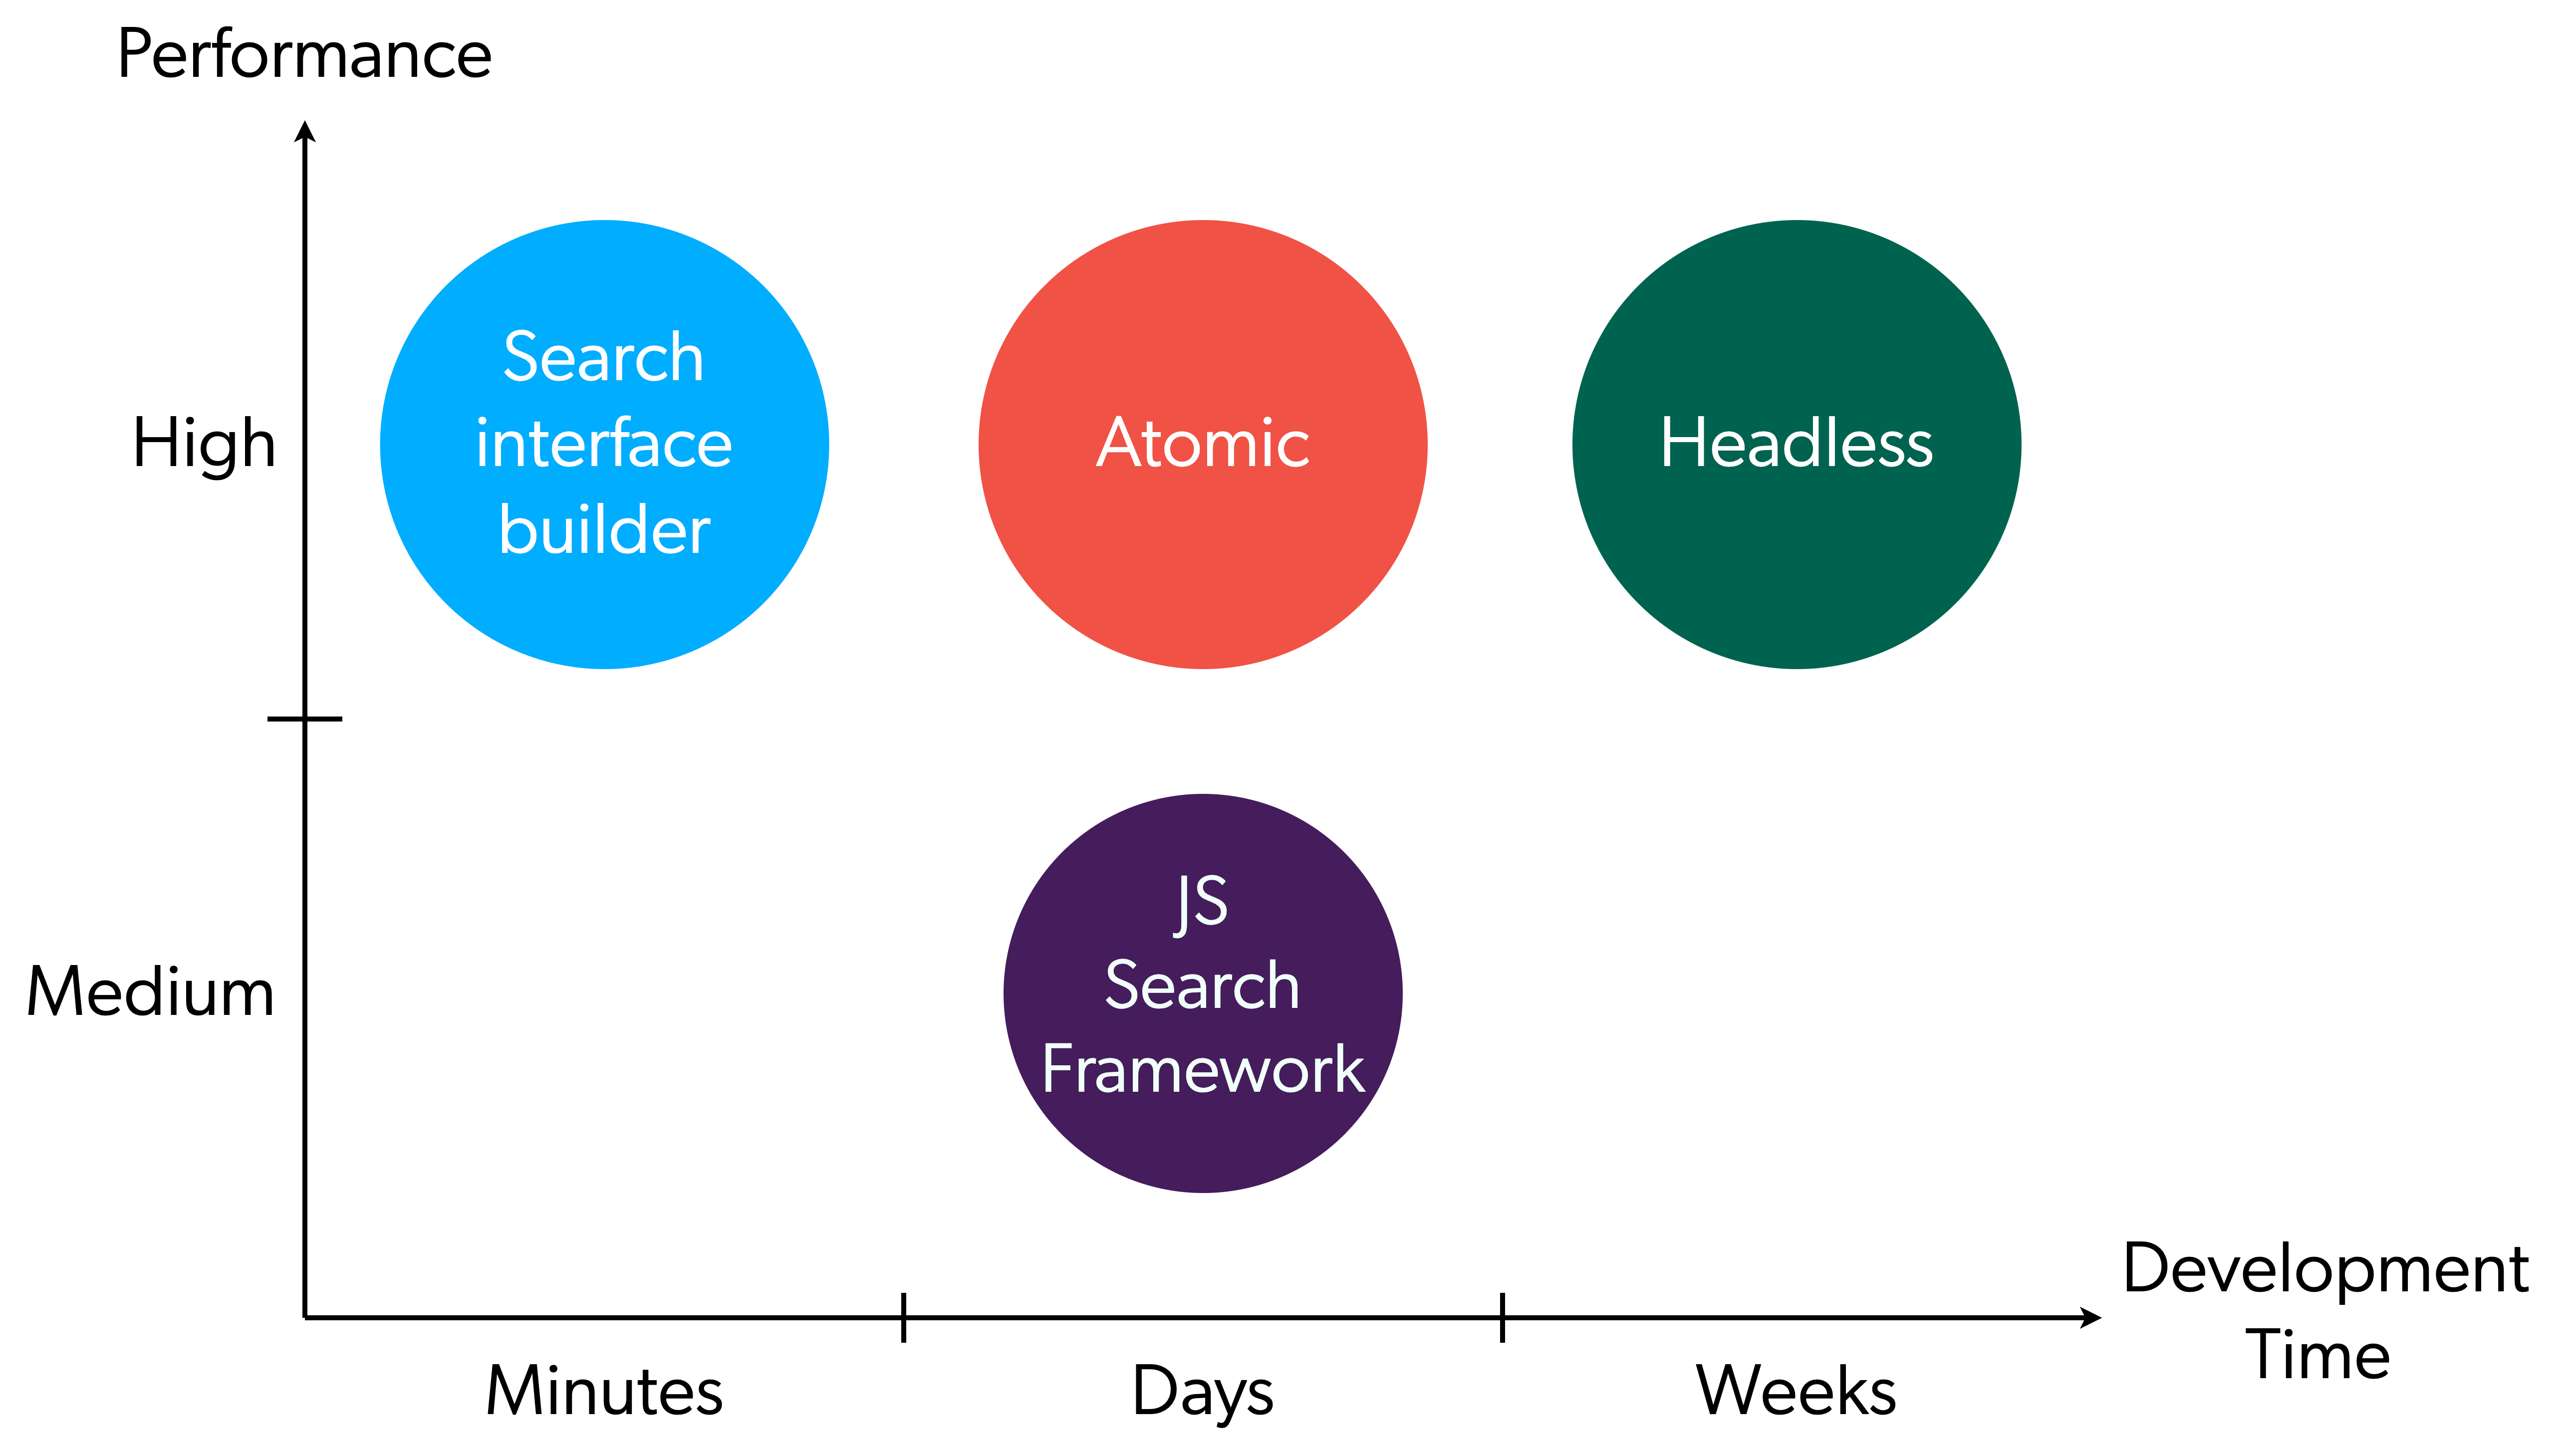 Diagram showing relations between development time and UI/UX customization for the Atomic, Headless, JS Search frameworks, the REST APIs, and the search interface builder